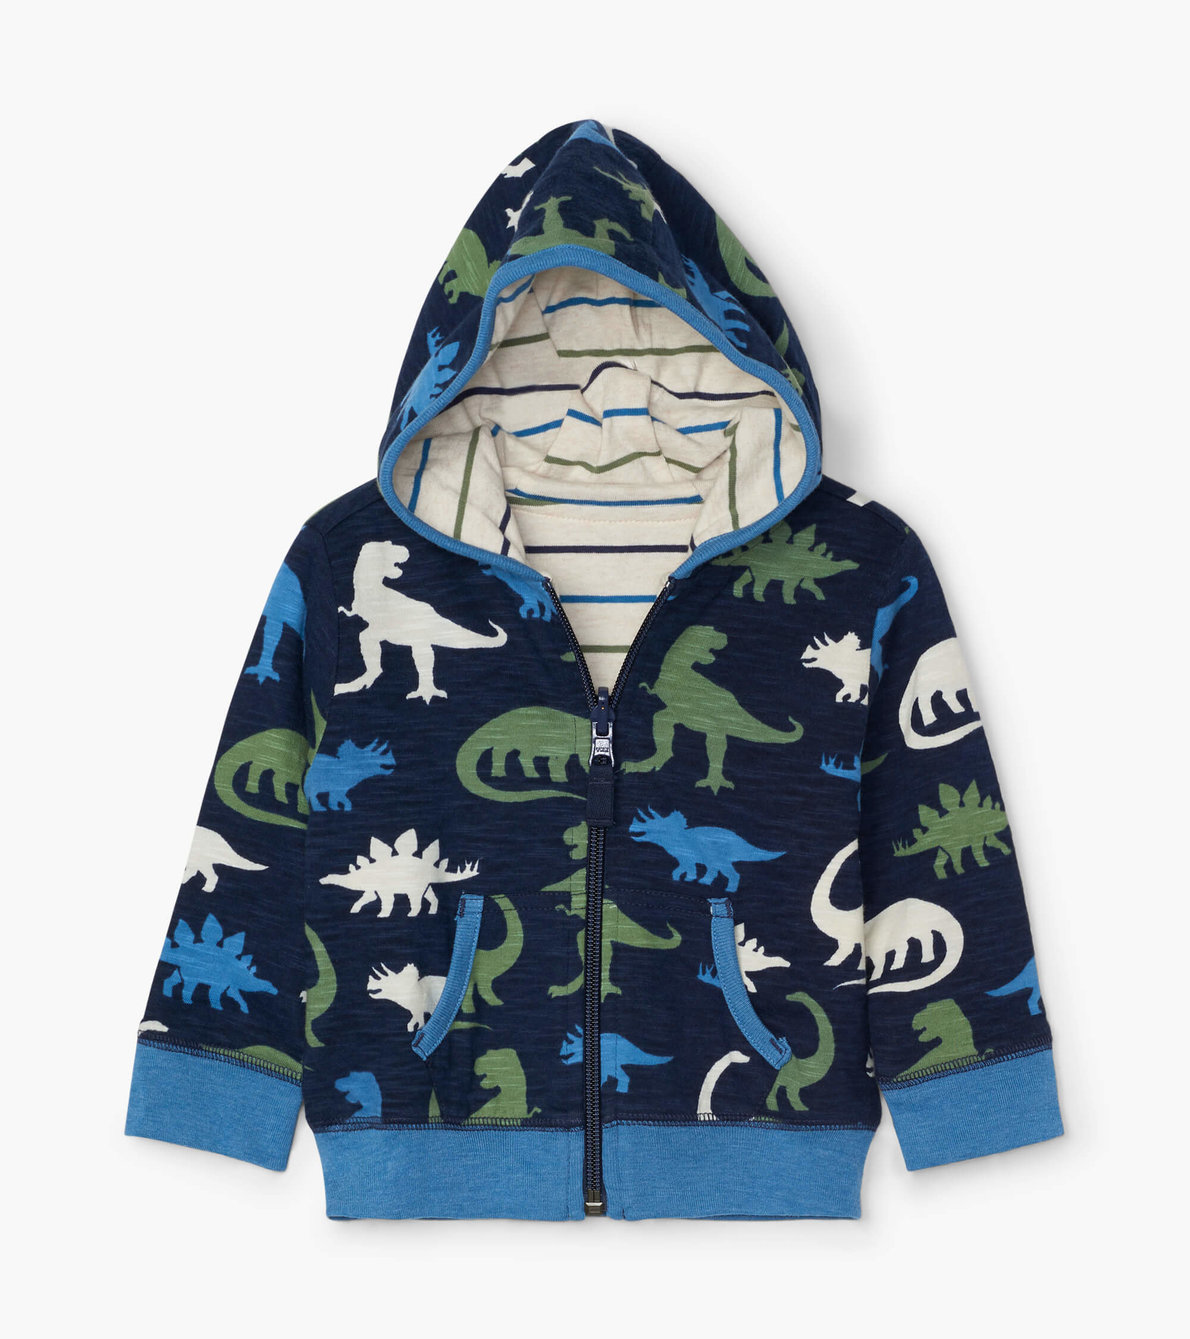 View larger image of Silhouette Dinos Reversible Baby Hoodie